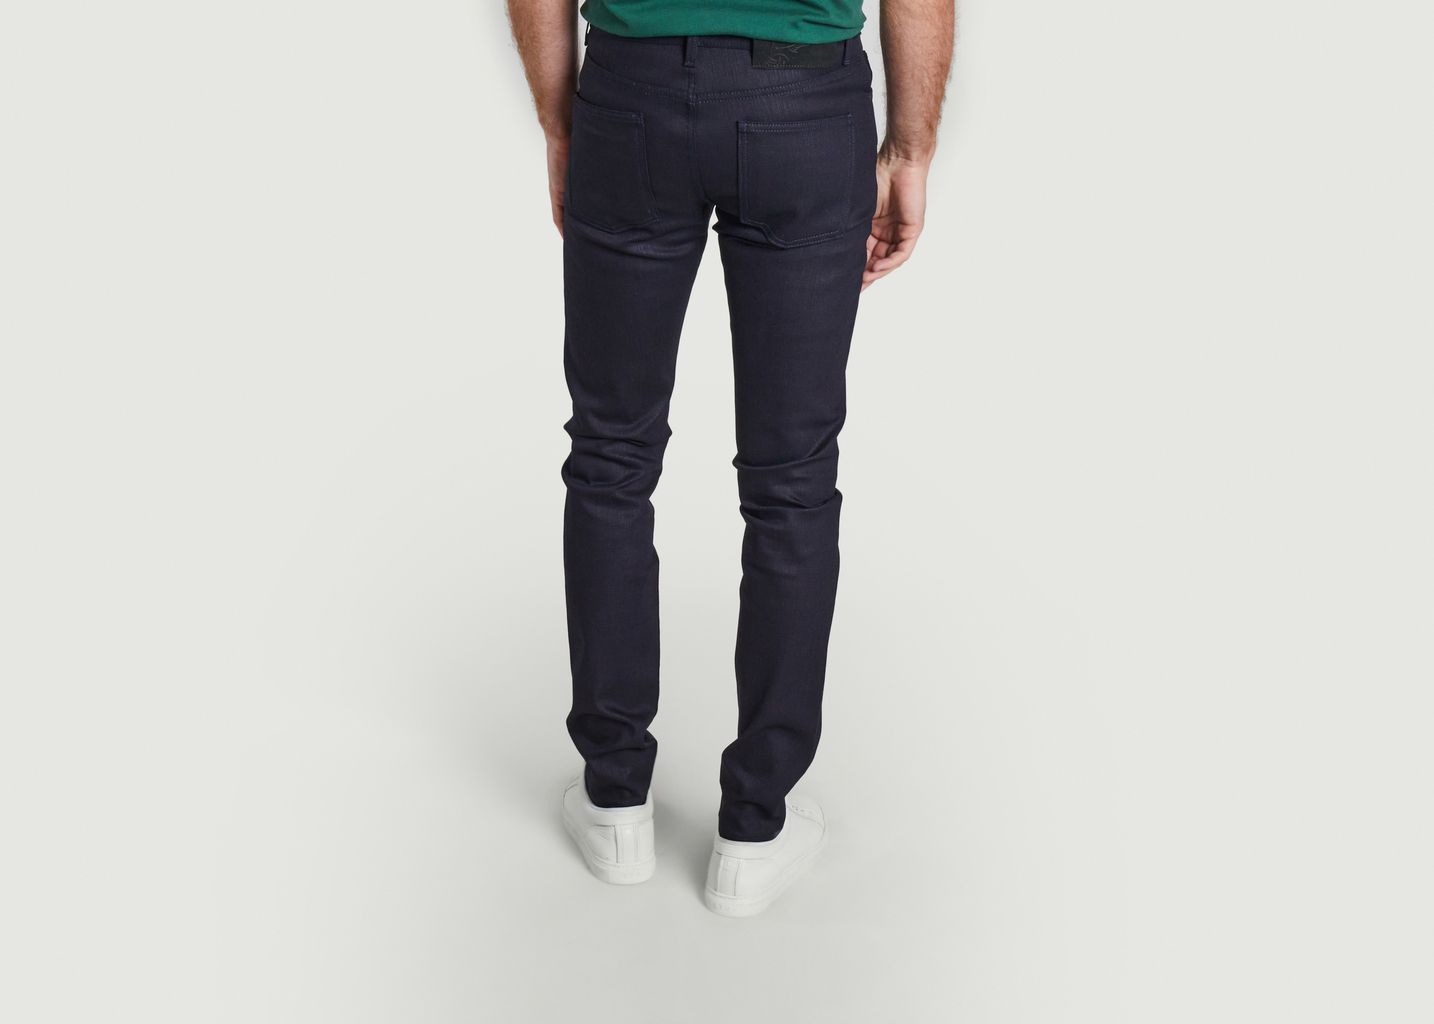 Jeans Super Guy Midnight Slub Stretch Selvedge - Naked and Famous